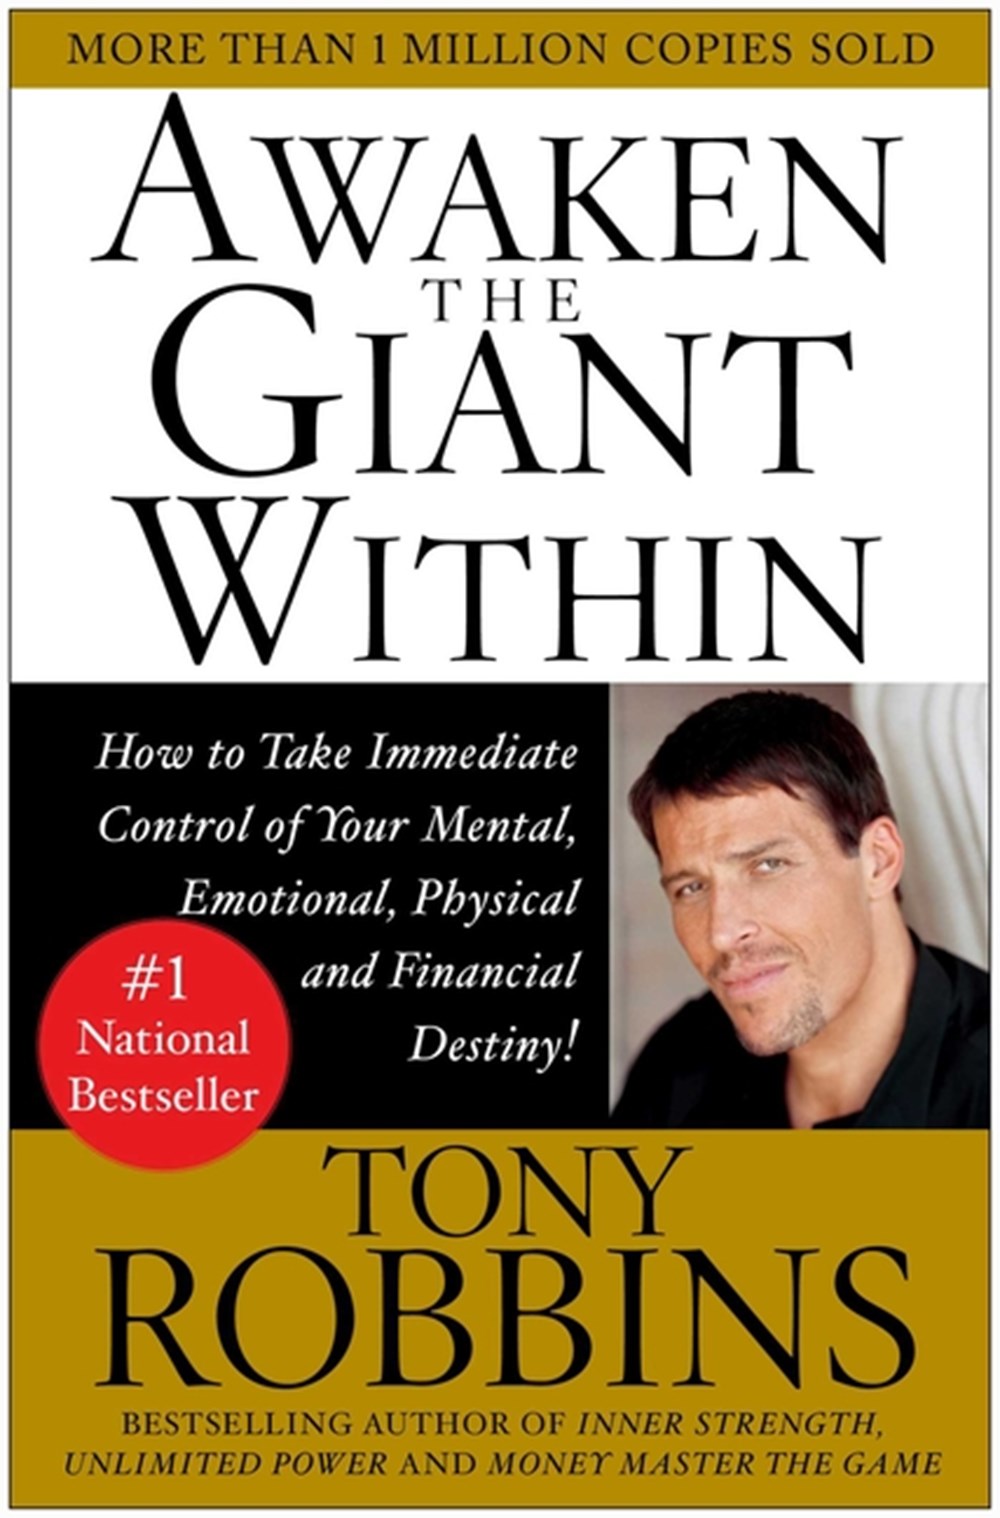 Awaken the Giant Within: How to Take Immediate Control of Your Mental, Emotional, Physical & Financi